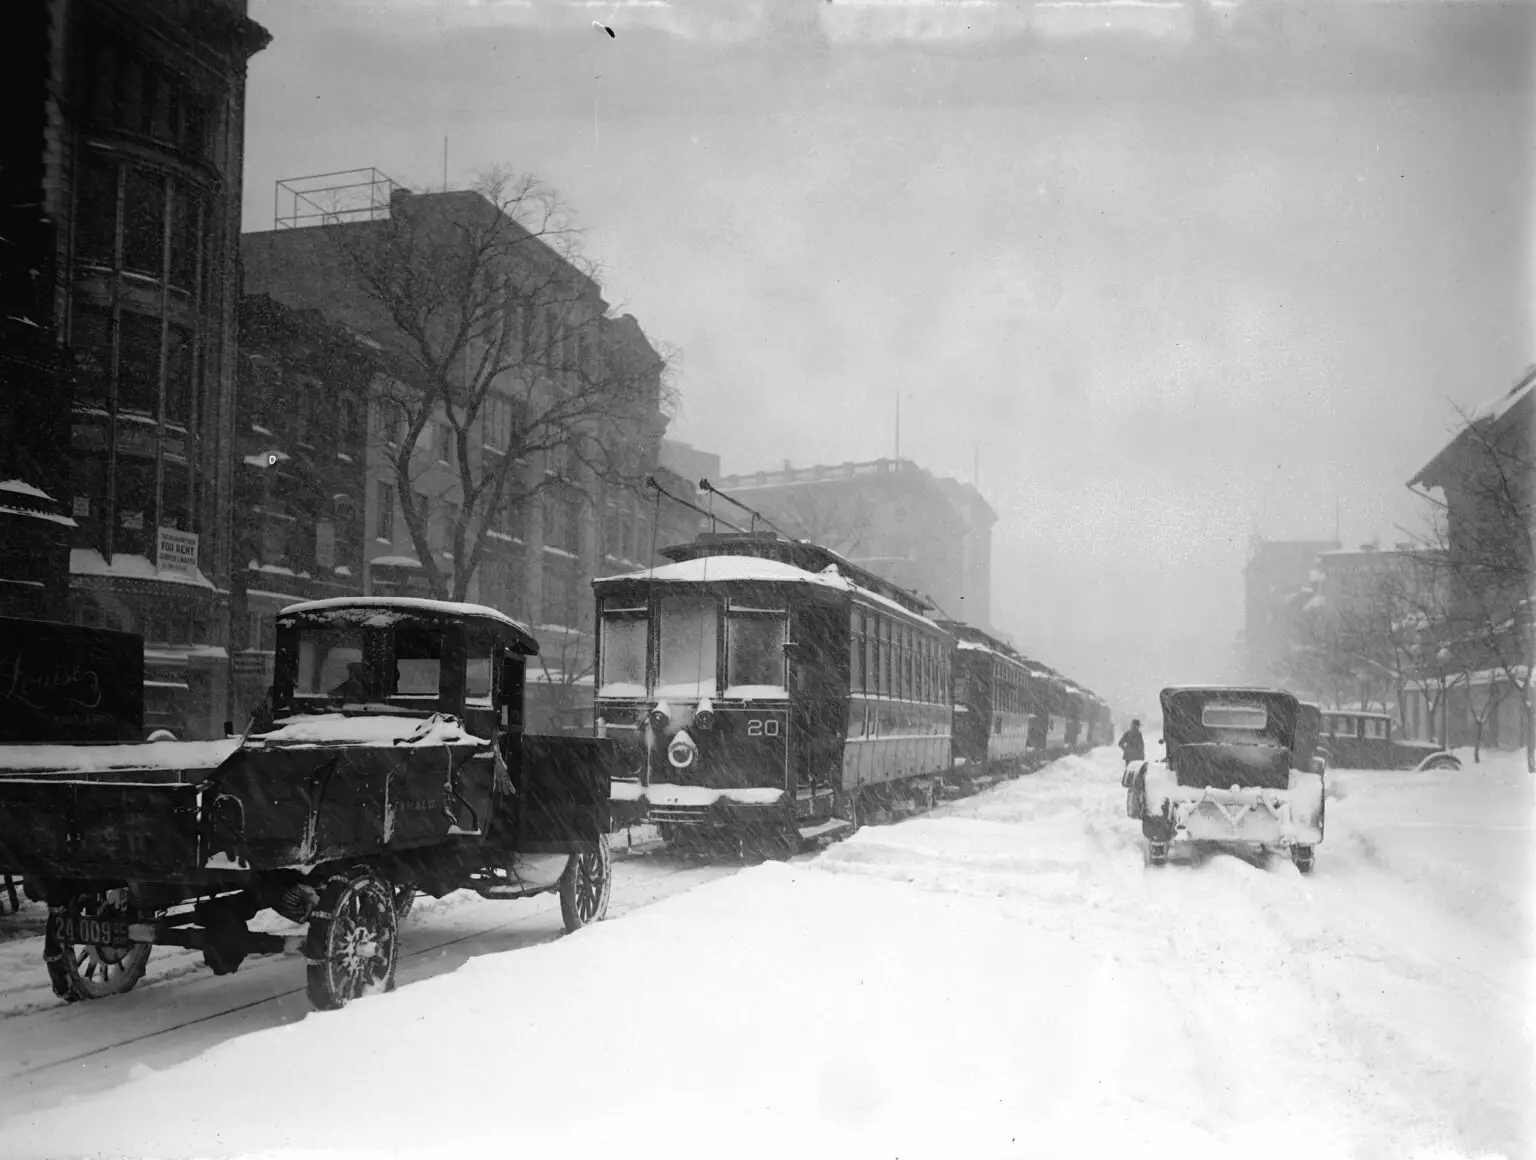 The Knickerbocker Theatre Tragedy: A Look Back at the Massive Snowstorm ...